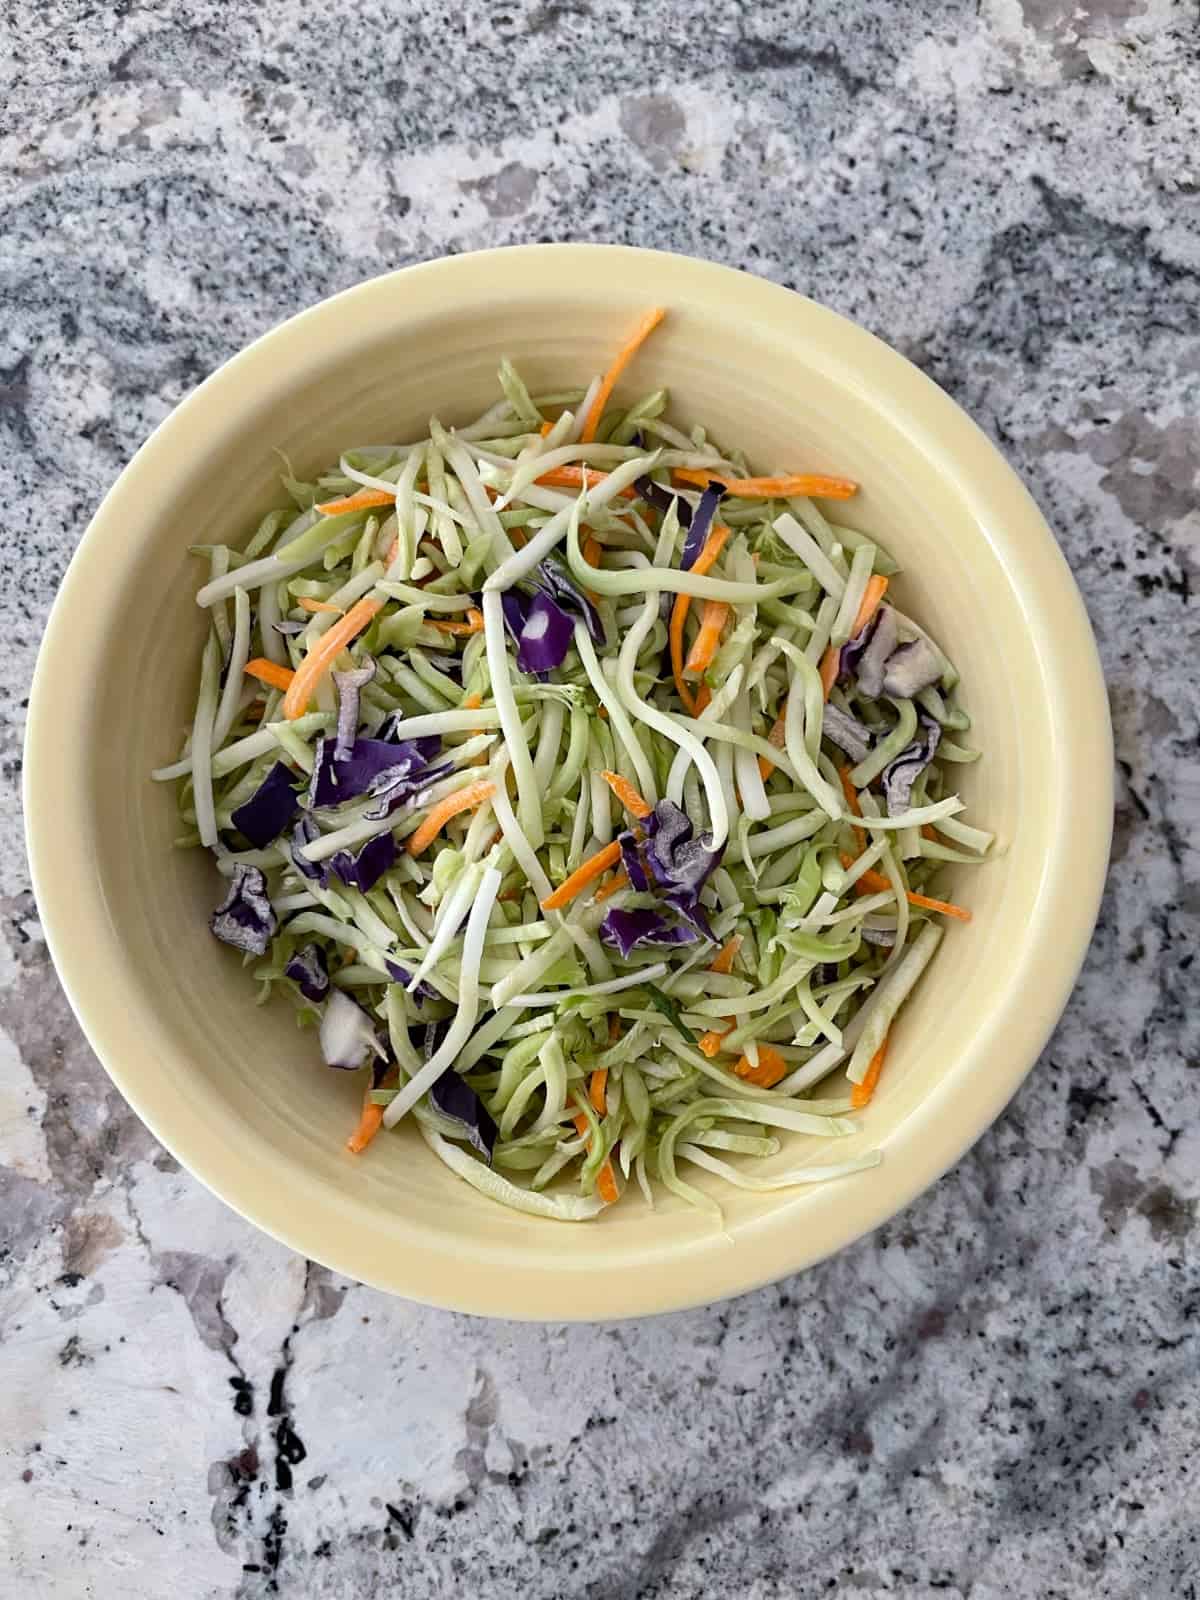 Packaged broccoli slaw coleslaw mix in yellow bowl.